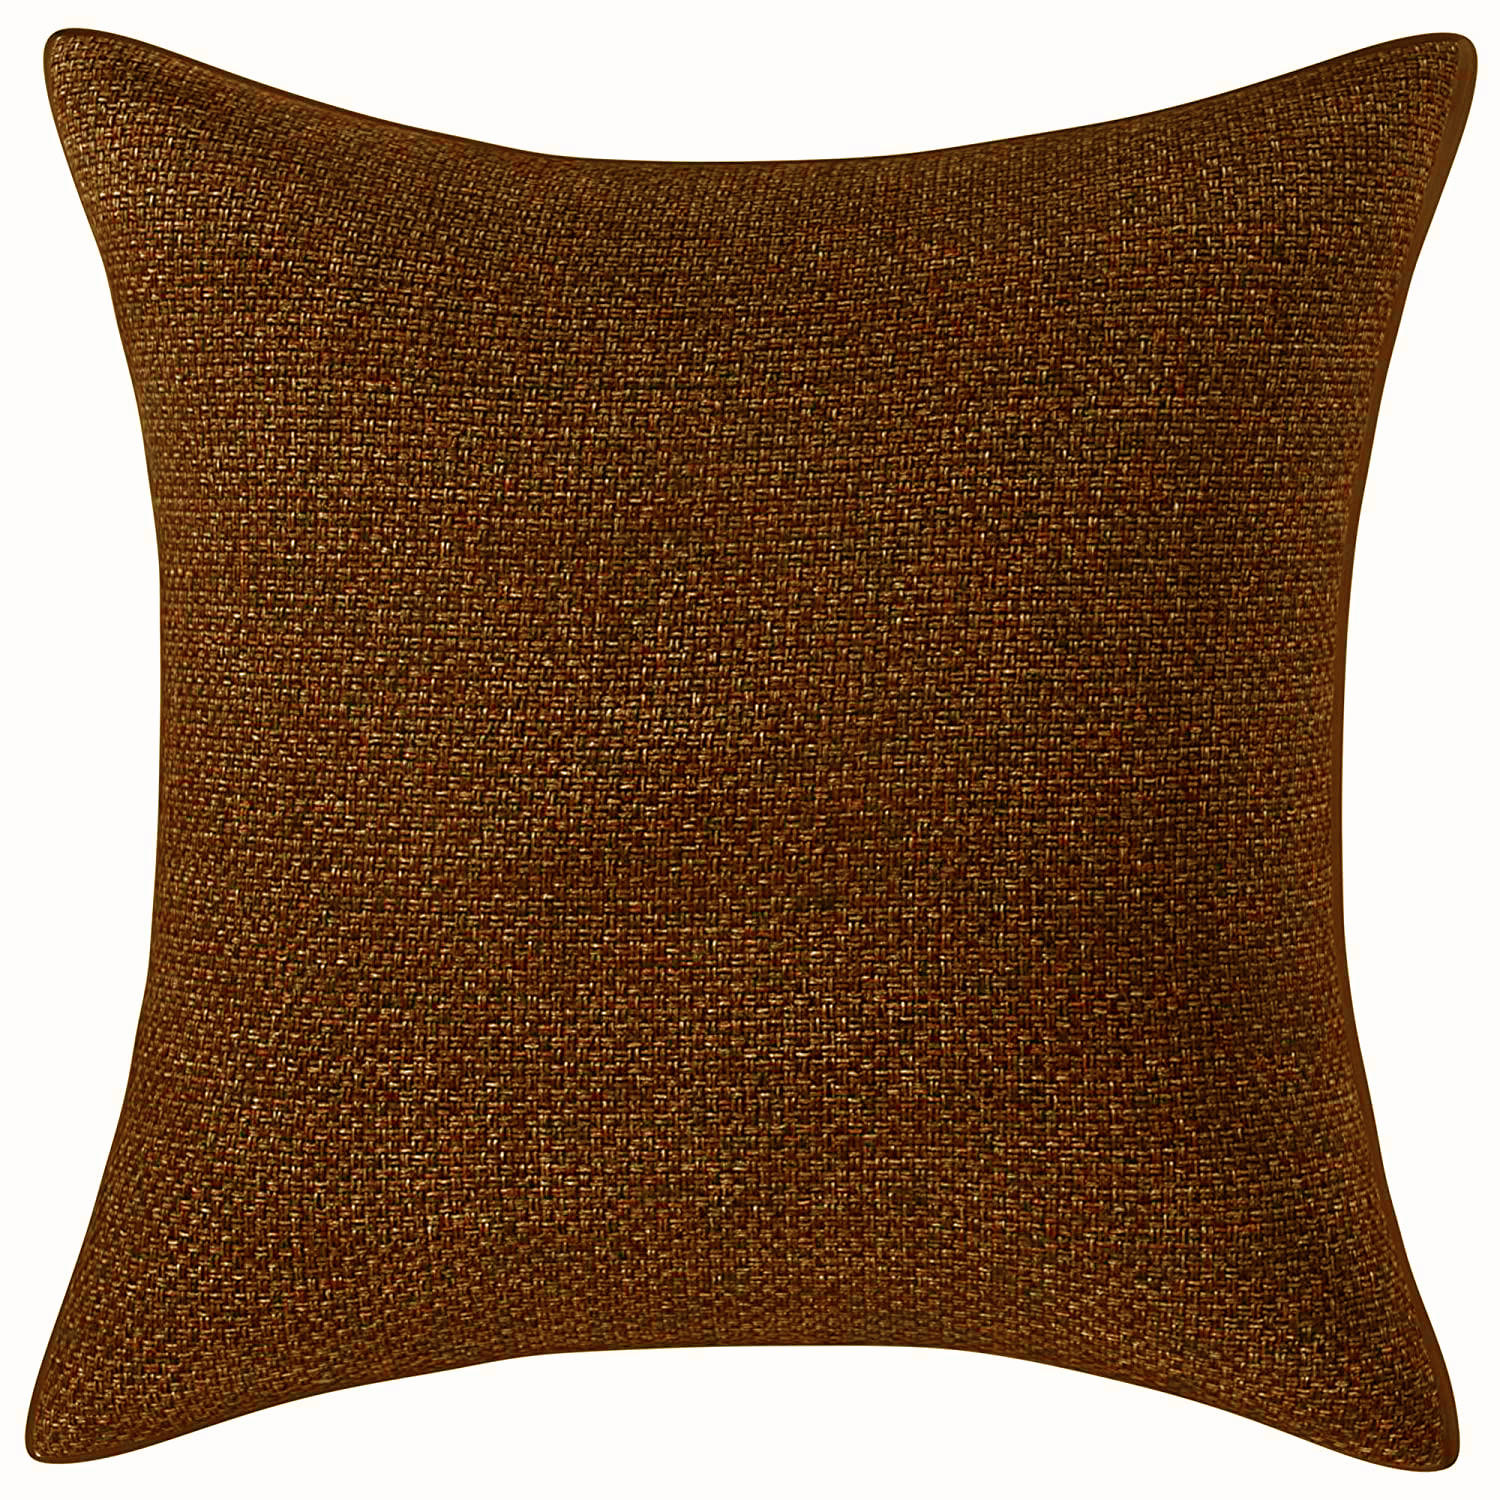 Kuber Industries Jute Blend Decorative Square Throw Pillow Cover Cushion Covers Pillowcase, Home Decor Decorations for Sofa Couch Bed Chair 24x24 Inch- (Brown)